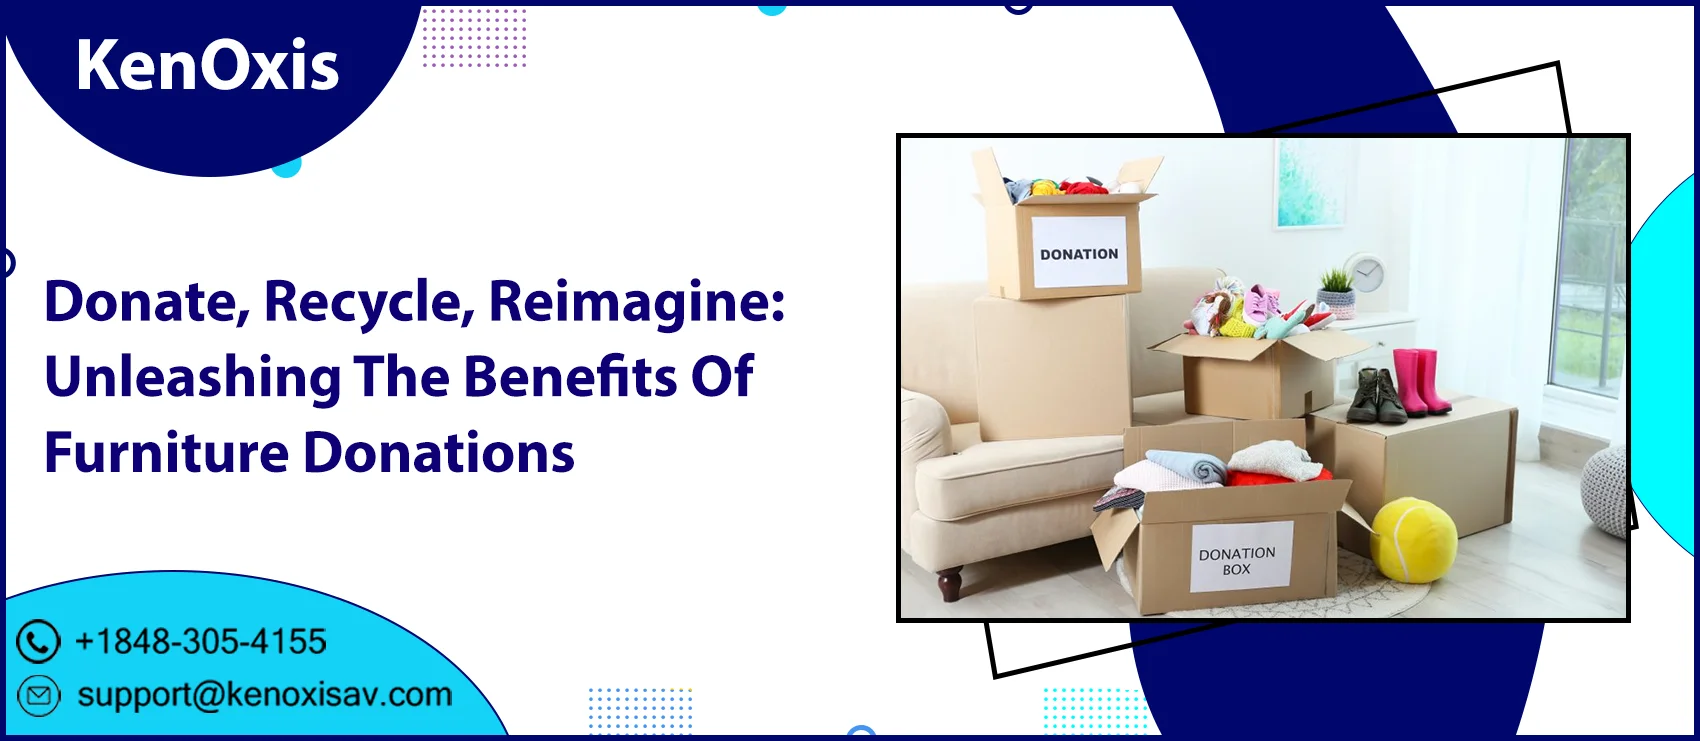 Donate, Recycle, Reimagine: Unleashing The Benefits Of Furniture Donations